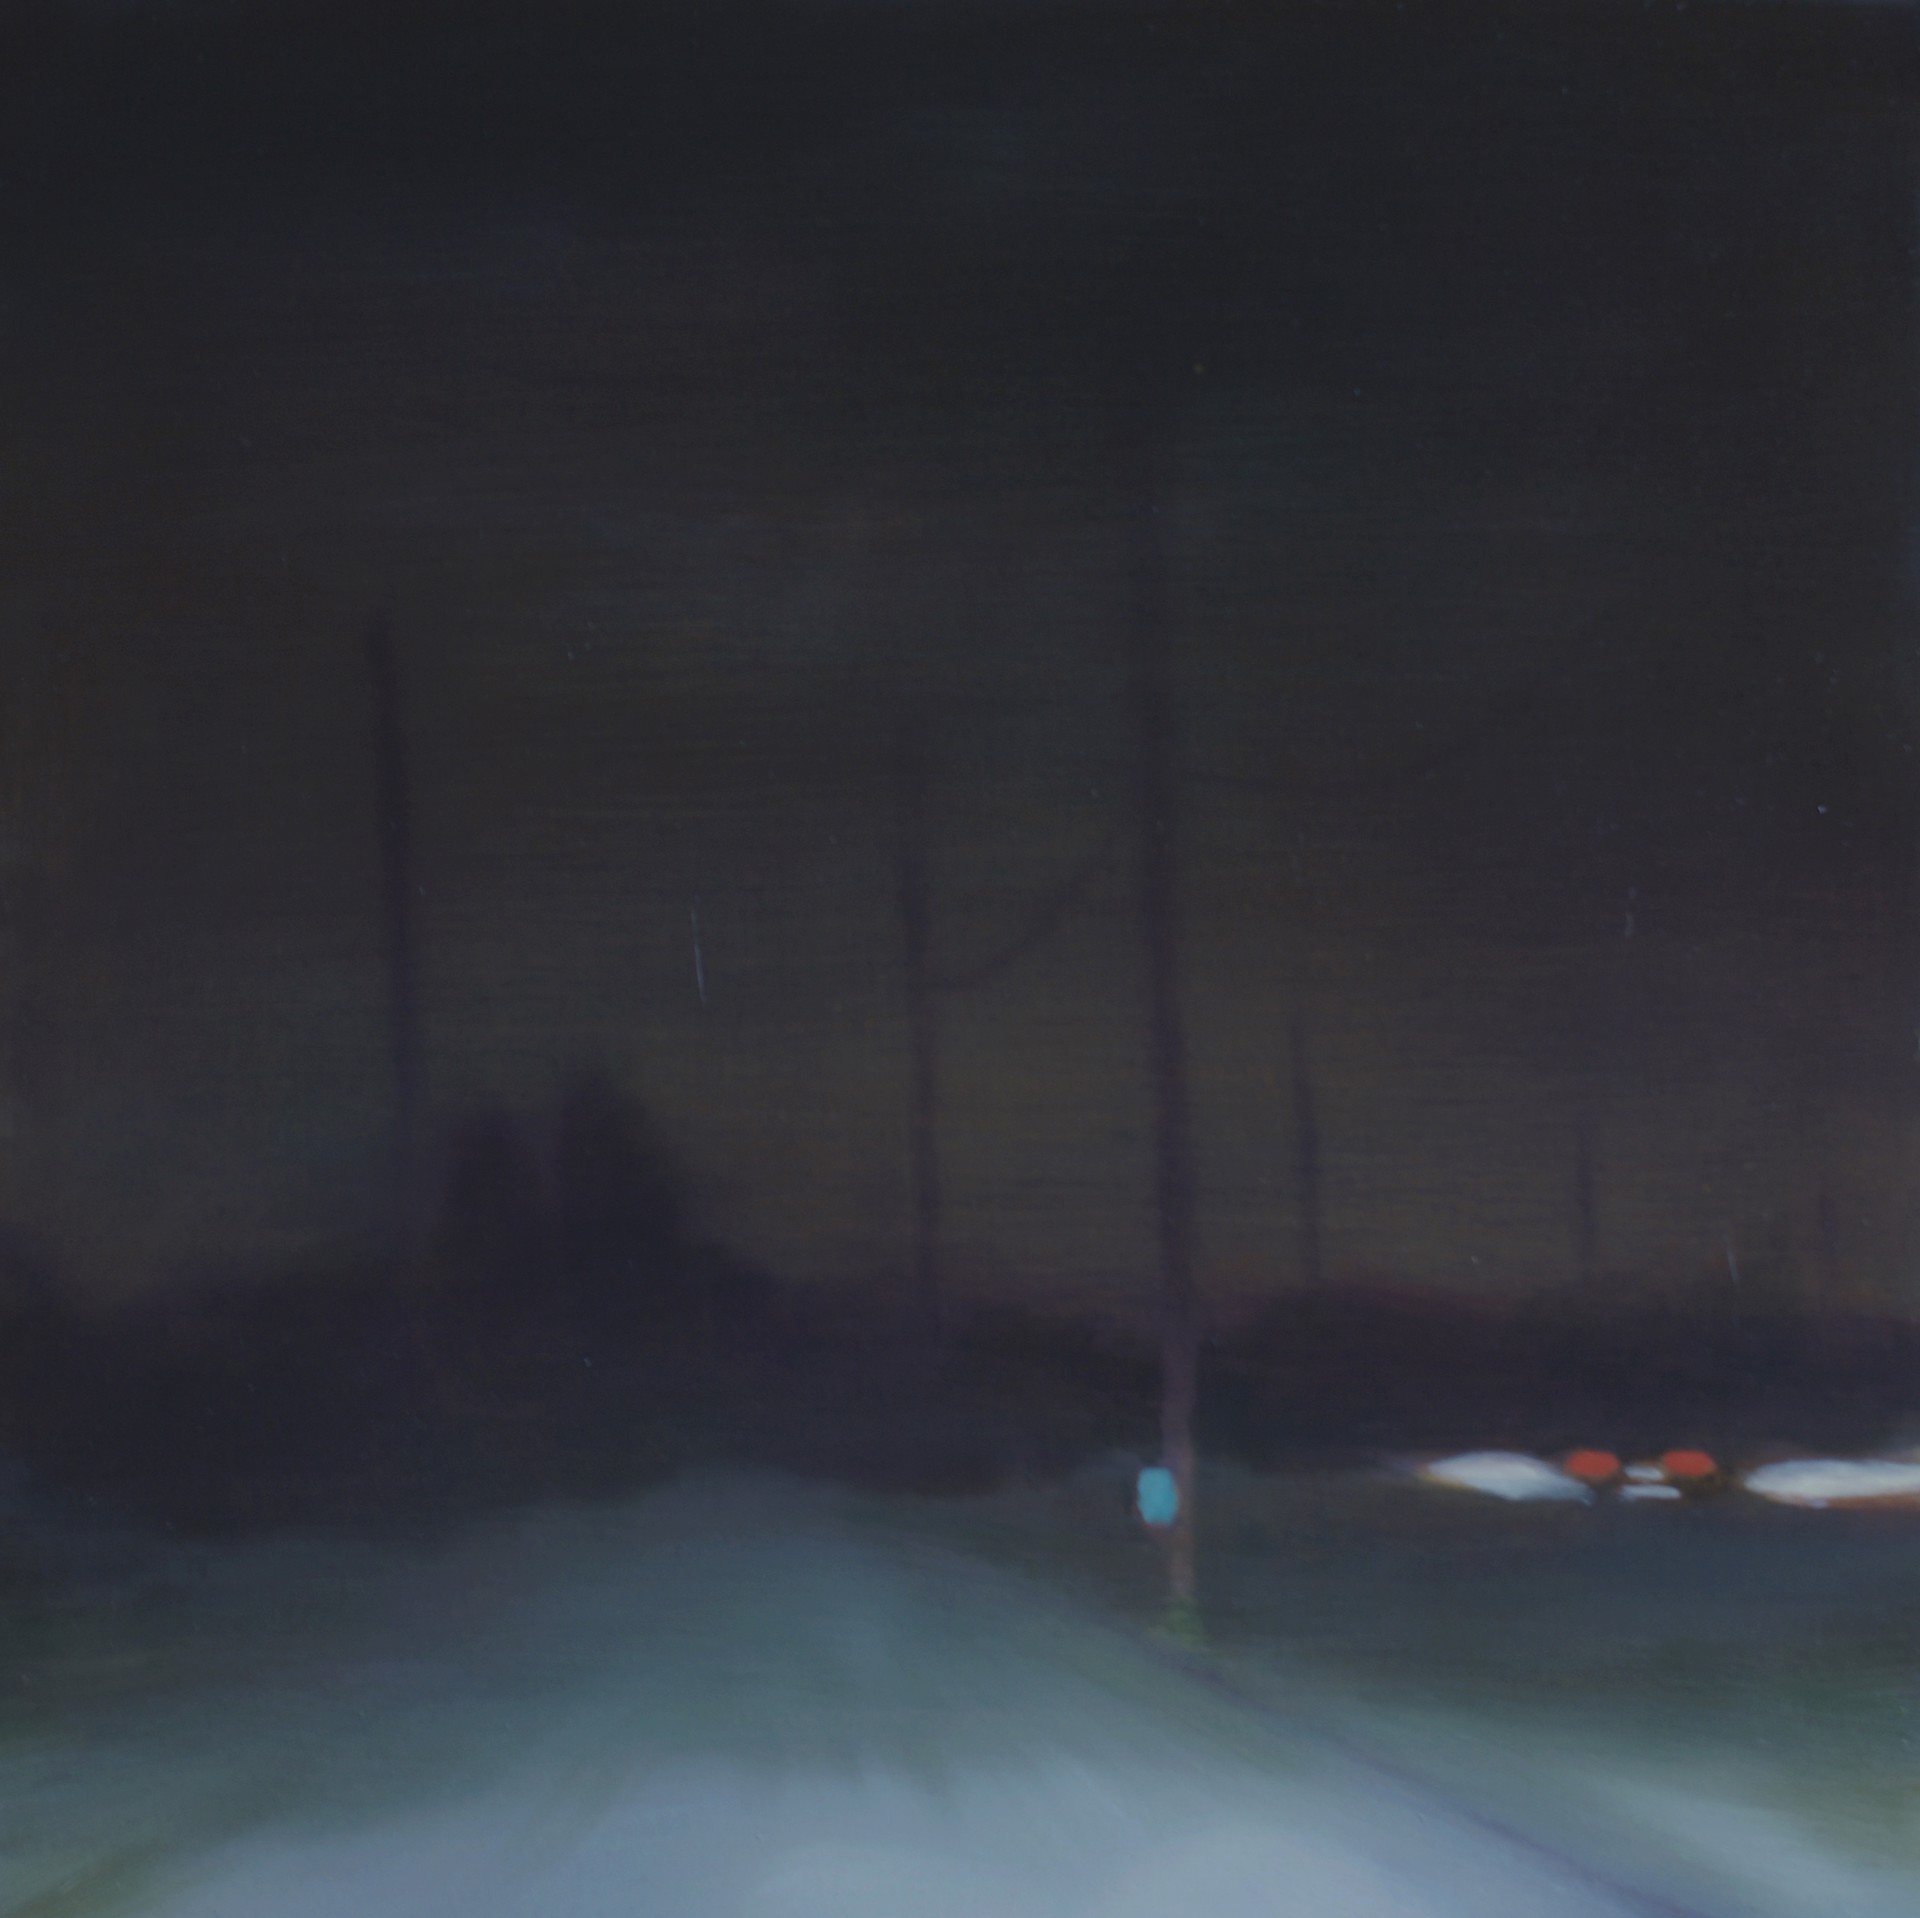 Nocturne (Christiana Road) by Keith Crowley